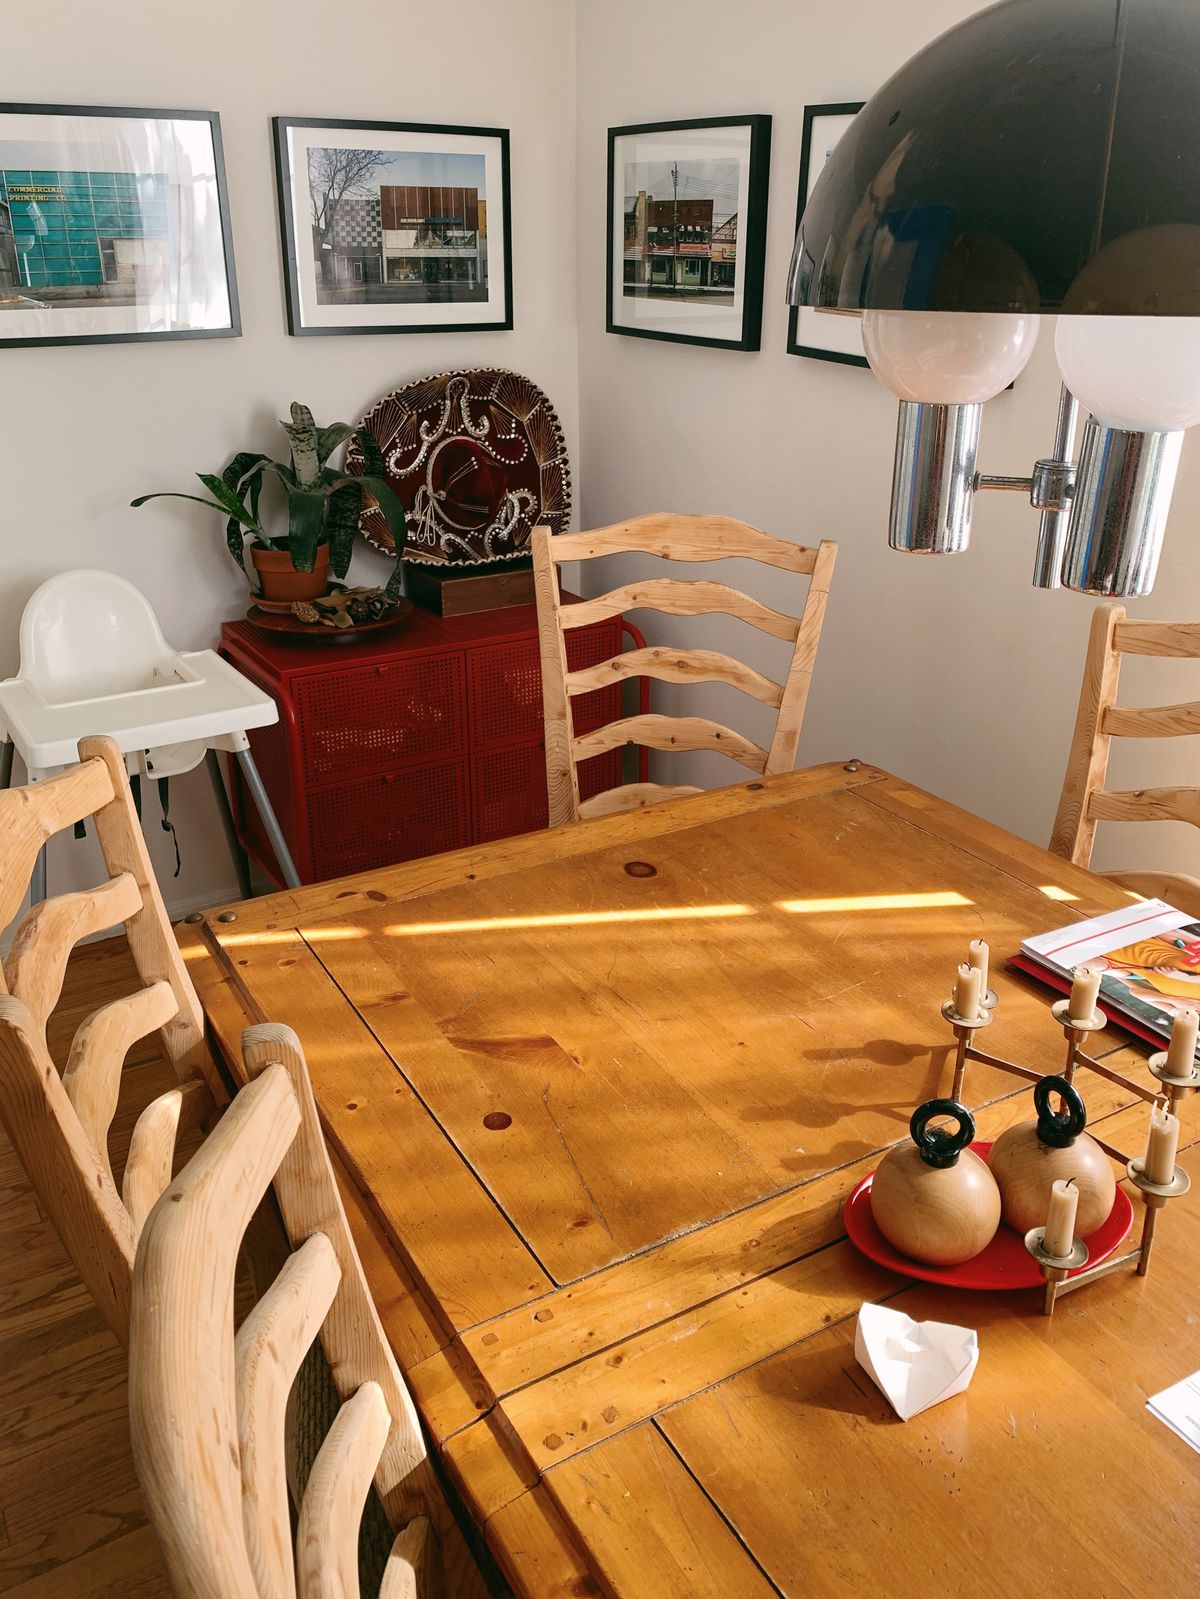 Four wooden chairs with tall backs surround a long wooden dining table. In the background is four photos displayed in black frames.